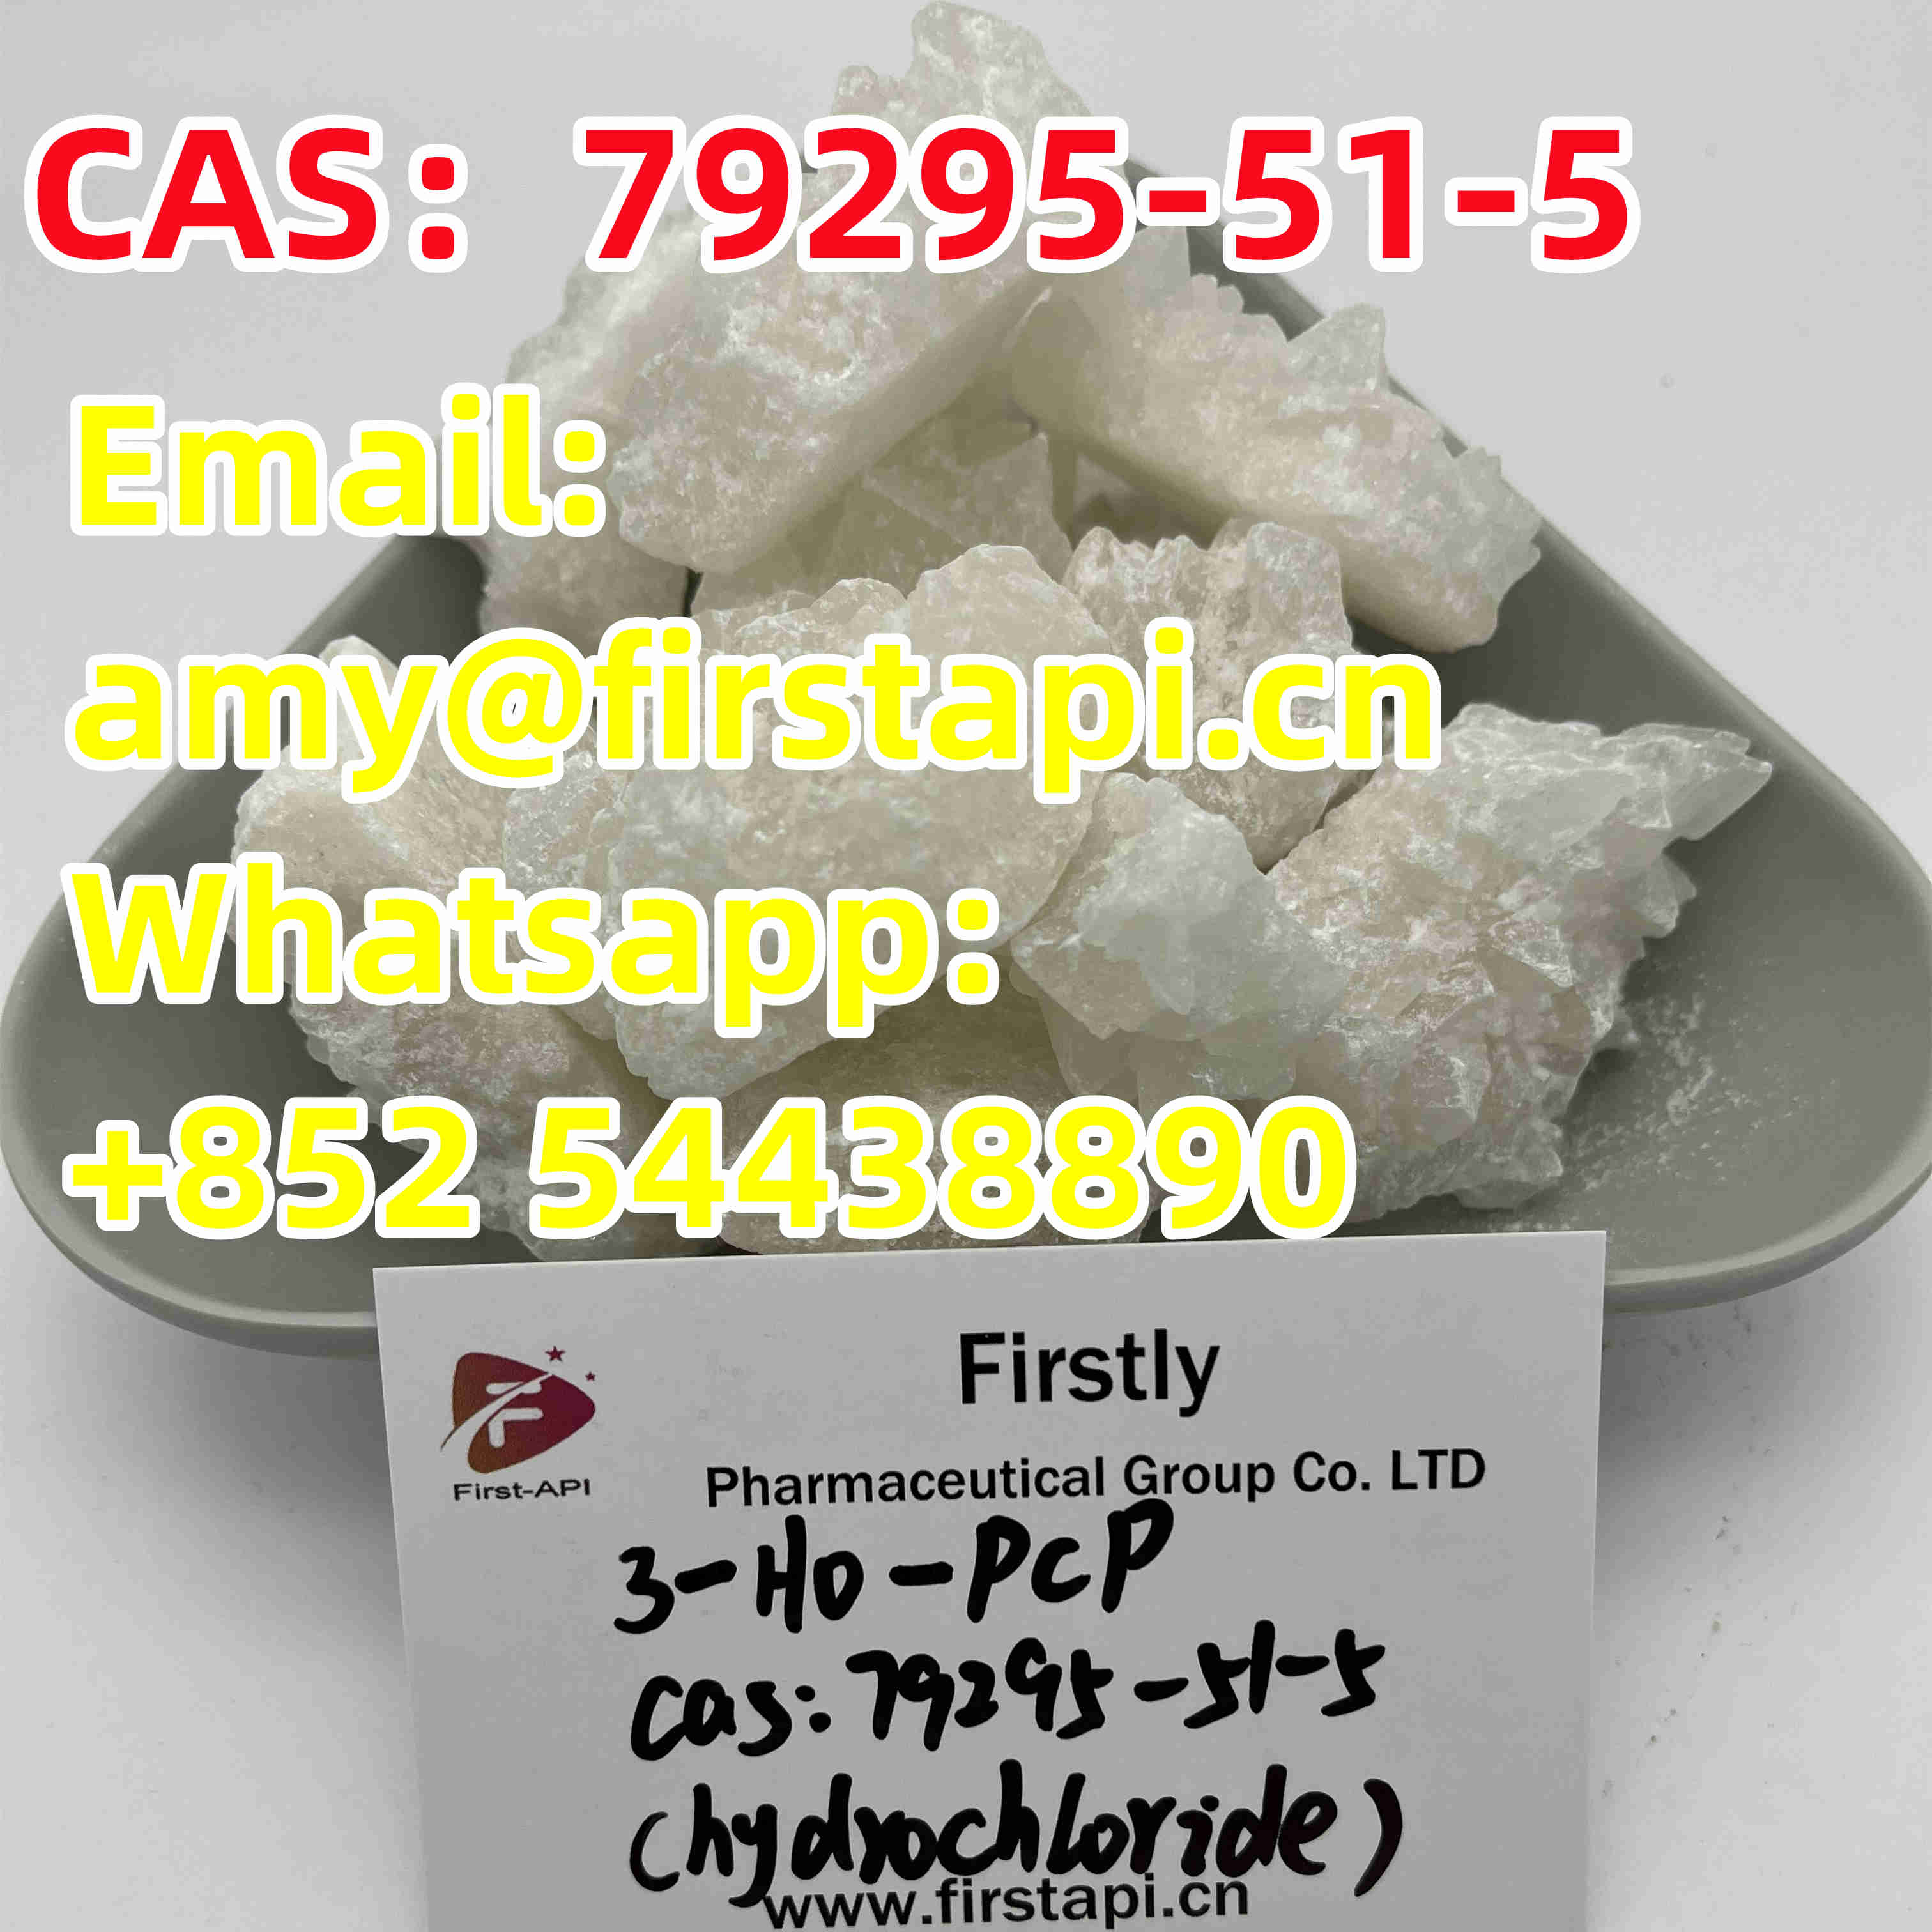 Whatsapp:+852 54438890,CAS No.:	79295-51-5,Chemical Name:	3-HO-PCP,made in china - photo